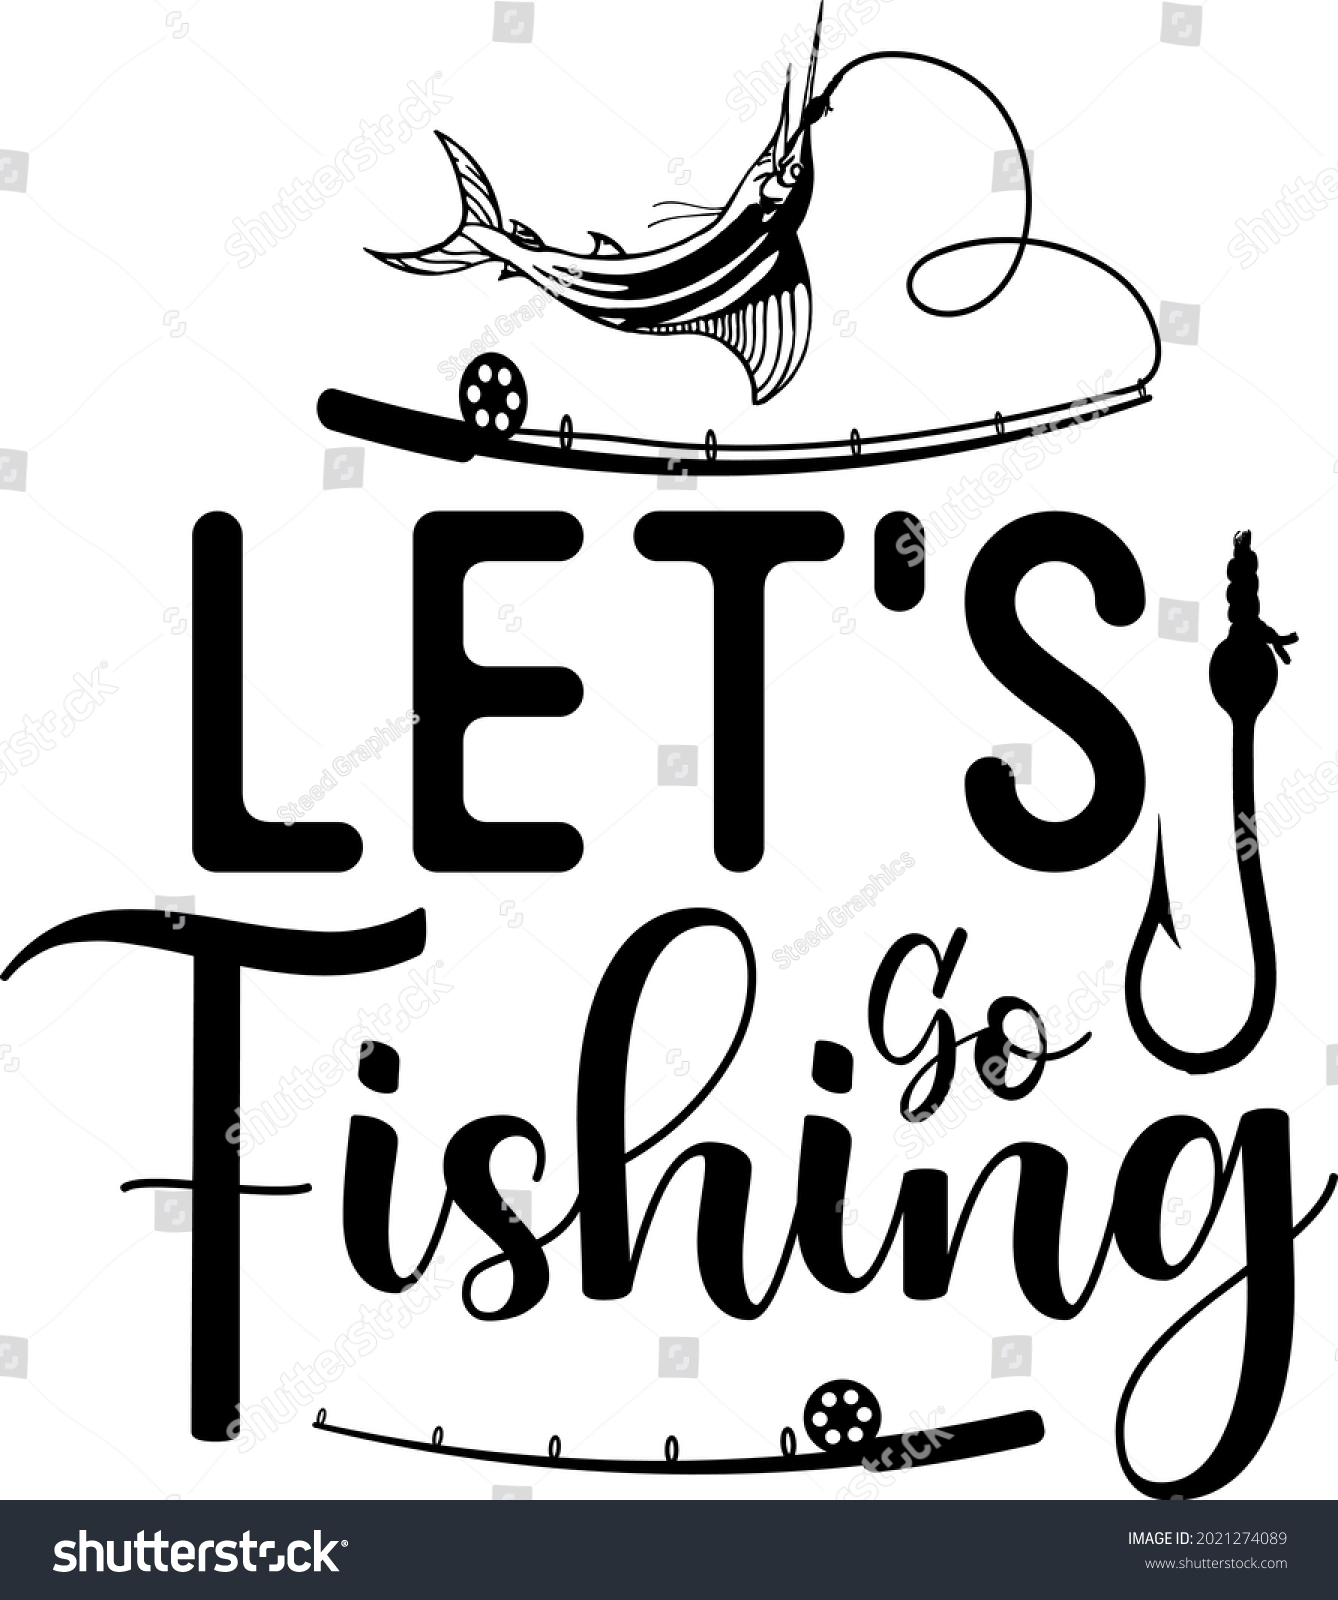 SVG of Creative and unique fishing svg design svg